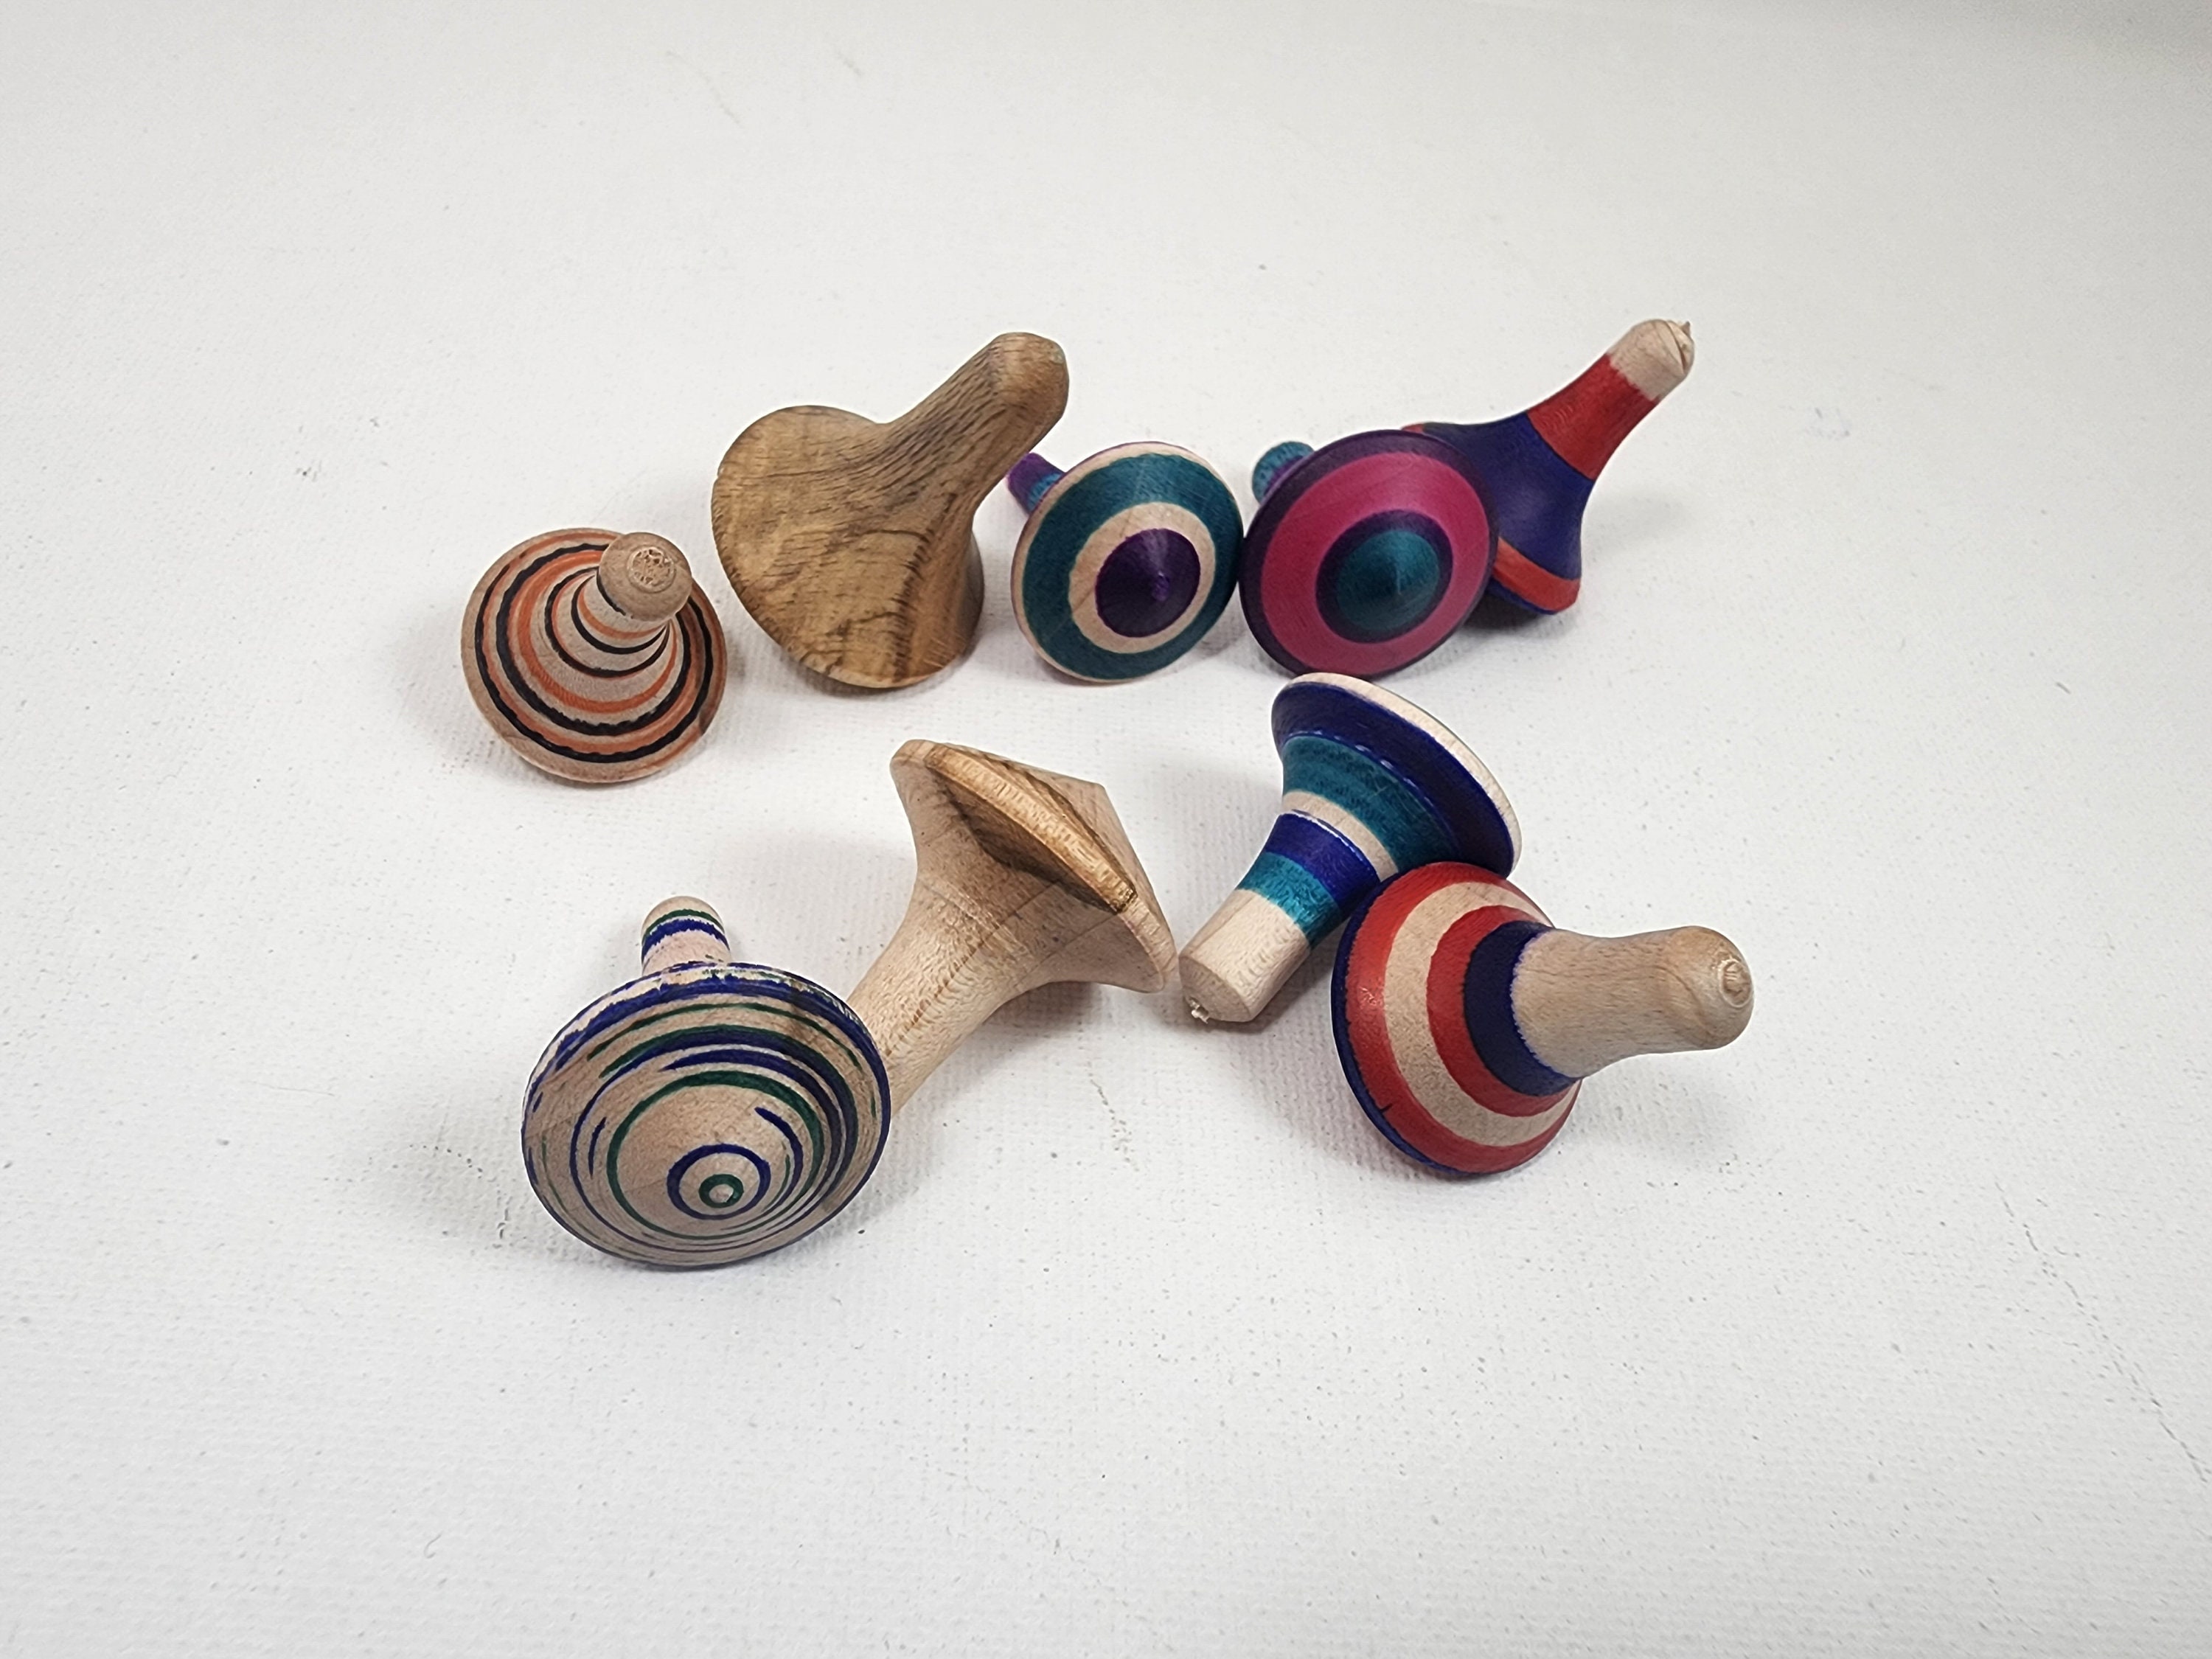 Small Wooden Spin Tops, Stocking Stuffer Hard Maple Top, Toy Tops ...